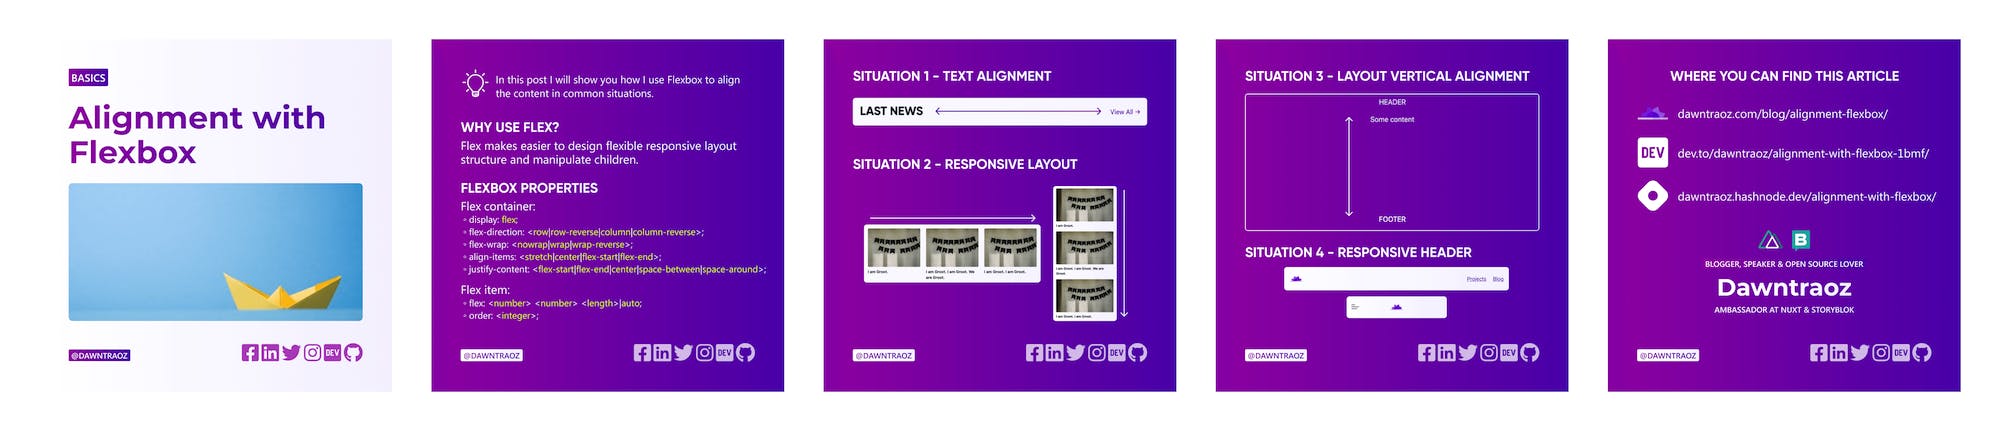 Instagram post summary for the article Alignment with Flexbox